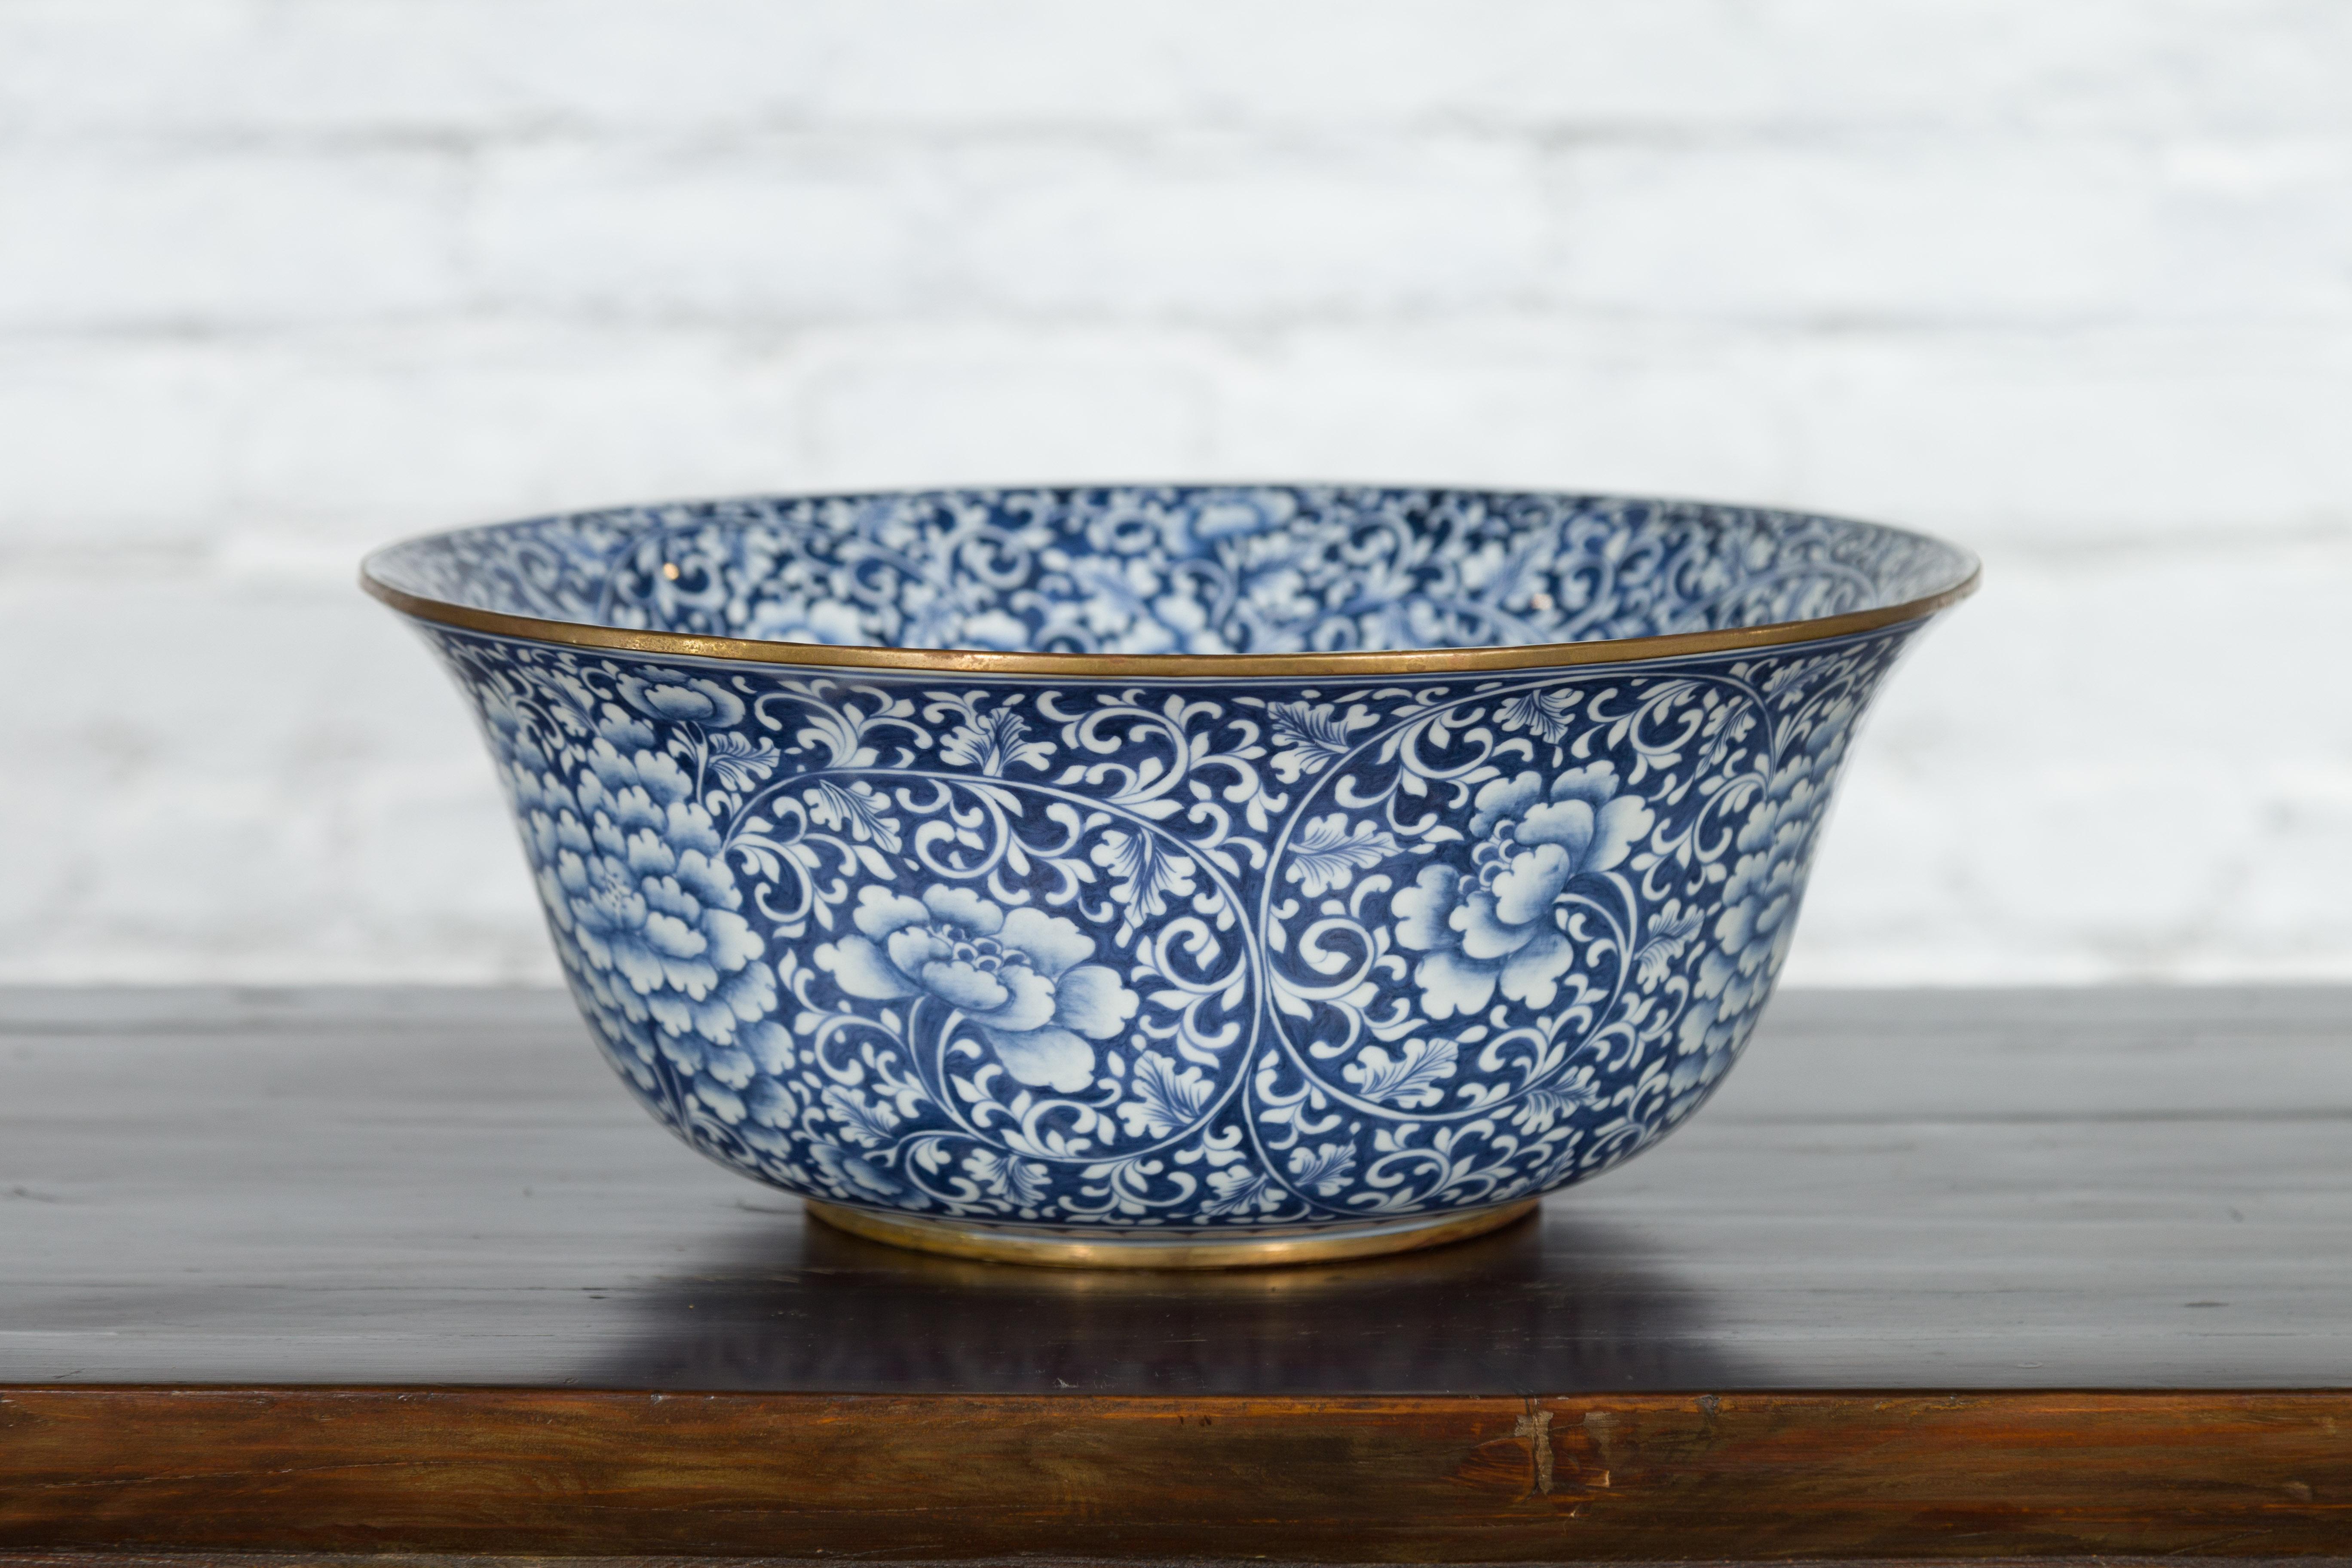 20th Century Large Thai Hand-Painted Blue and White Porcelain Bowl with Floral Motifs